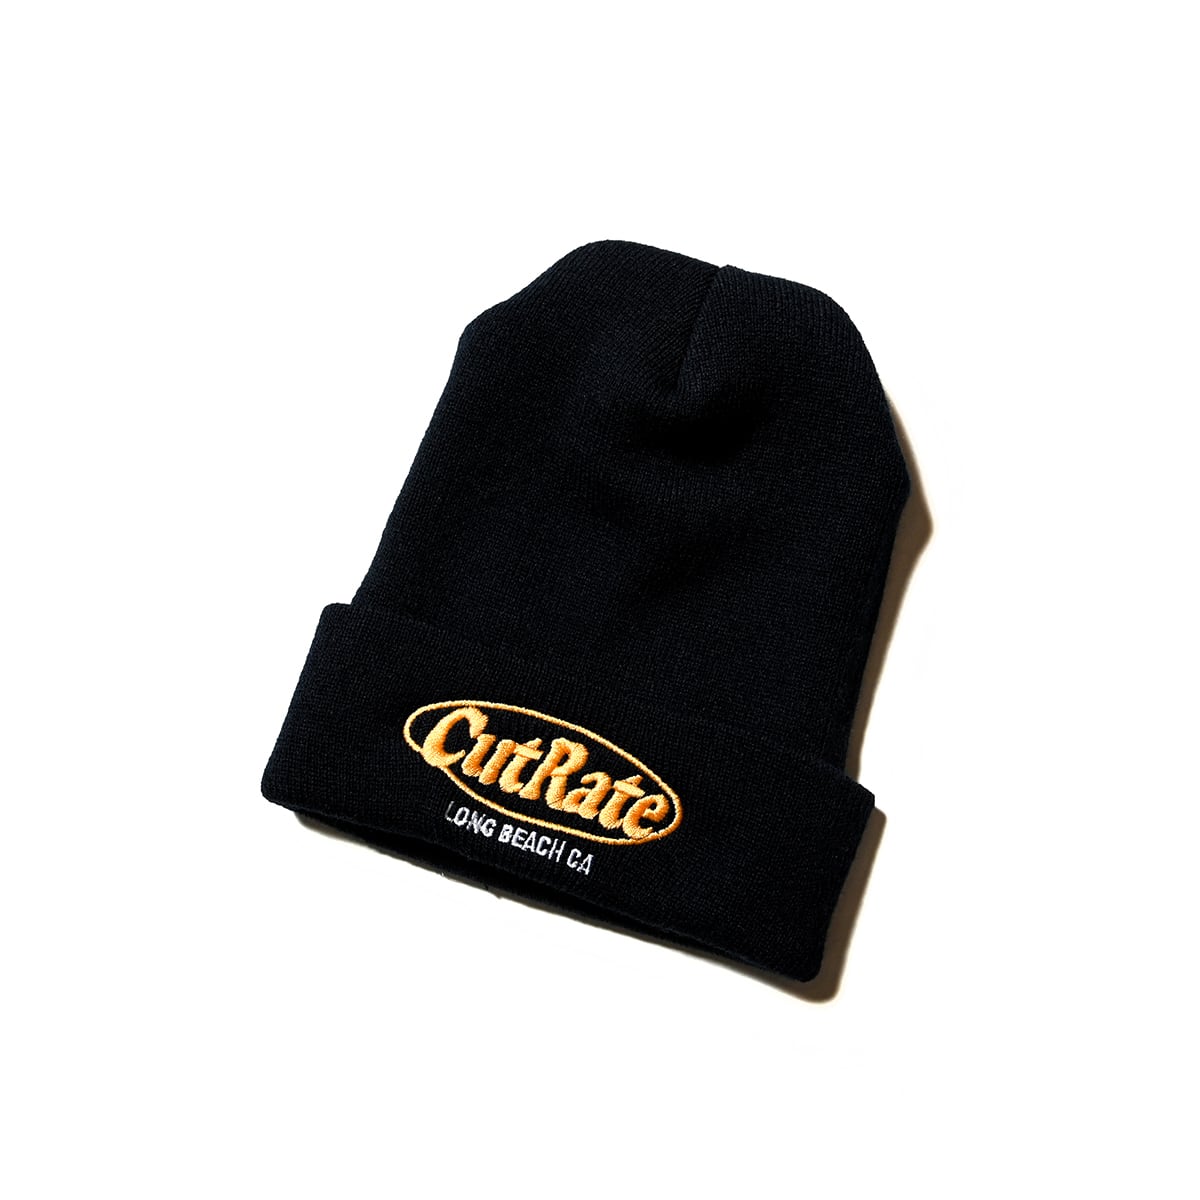 CUTRATE(カットレイト) ニットキャップ CUTRATE LOGO EMBROIDERY KNIT CAP CR-21AW012 │ NEXX  ONLINE SHOP